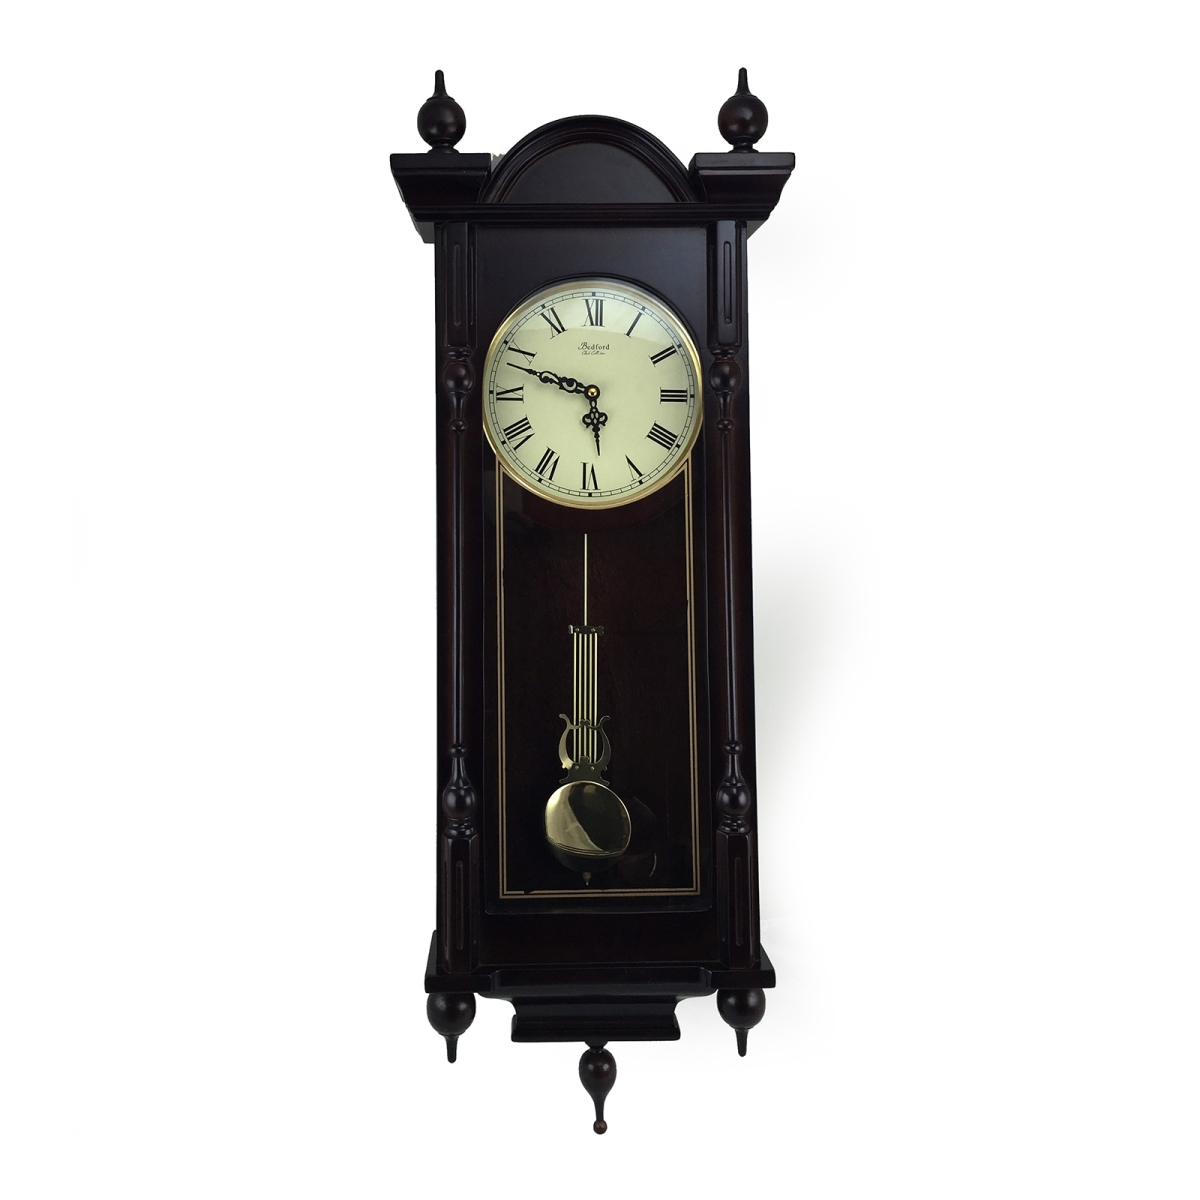 Picture of Bedford Clock Collection BED-20101 31 in. Grand Antique Mahogany Cherry Oak Chiming Wall Clock with Roman Numerals